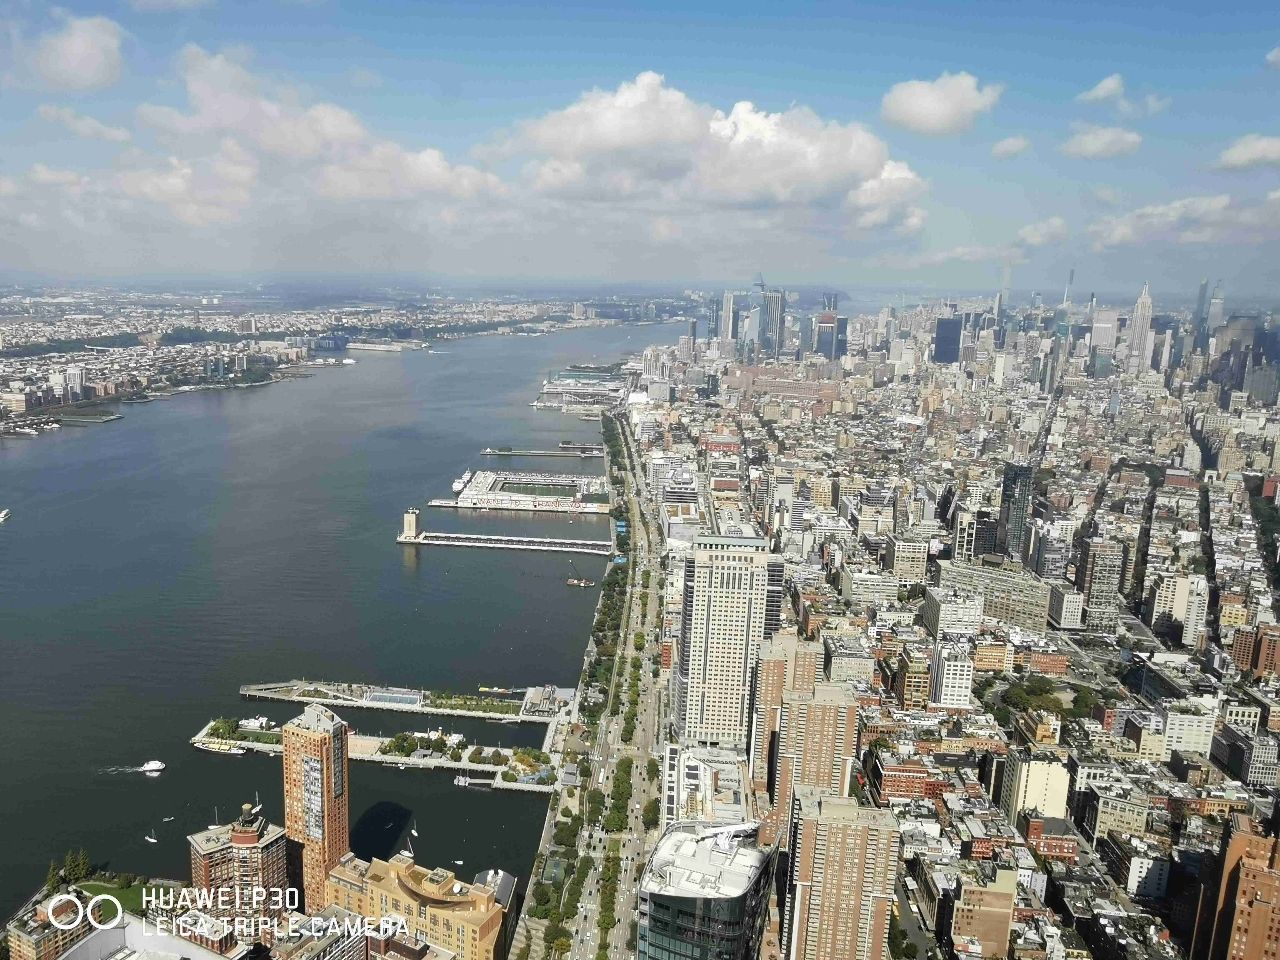 Hudson River - From One World Observatory, United States